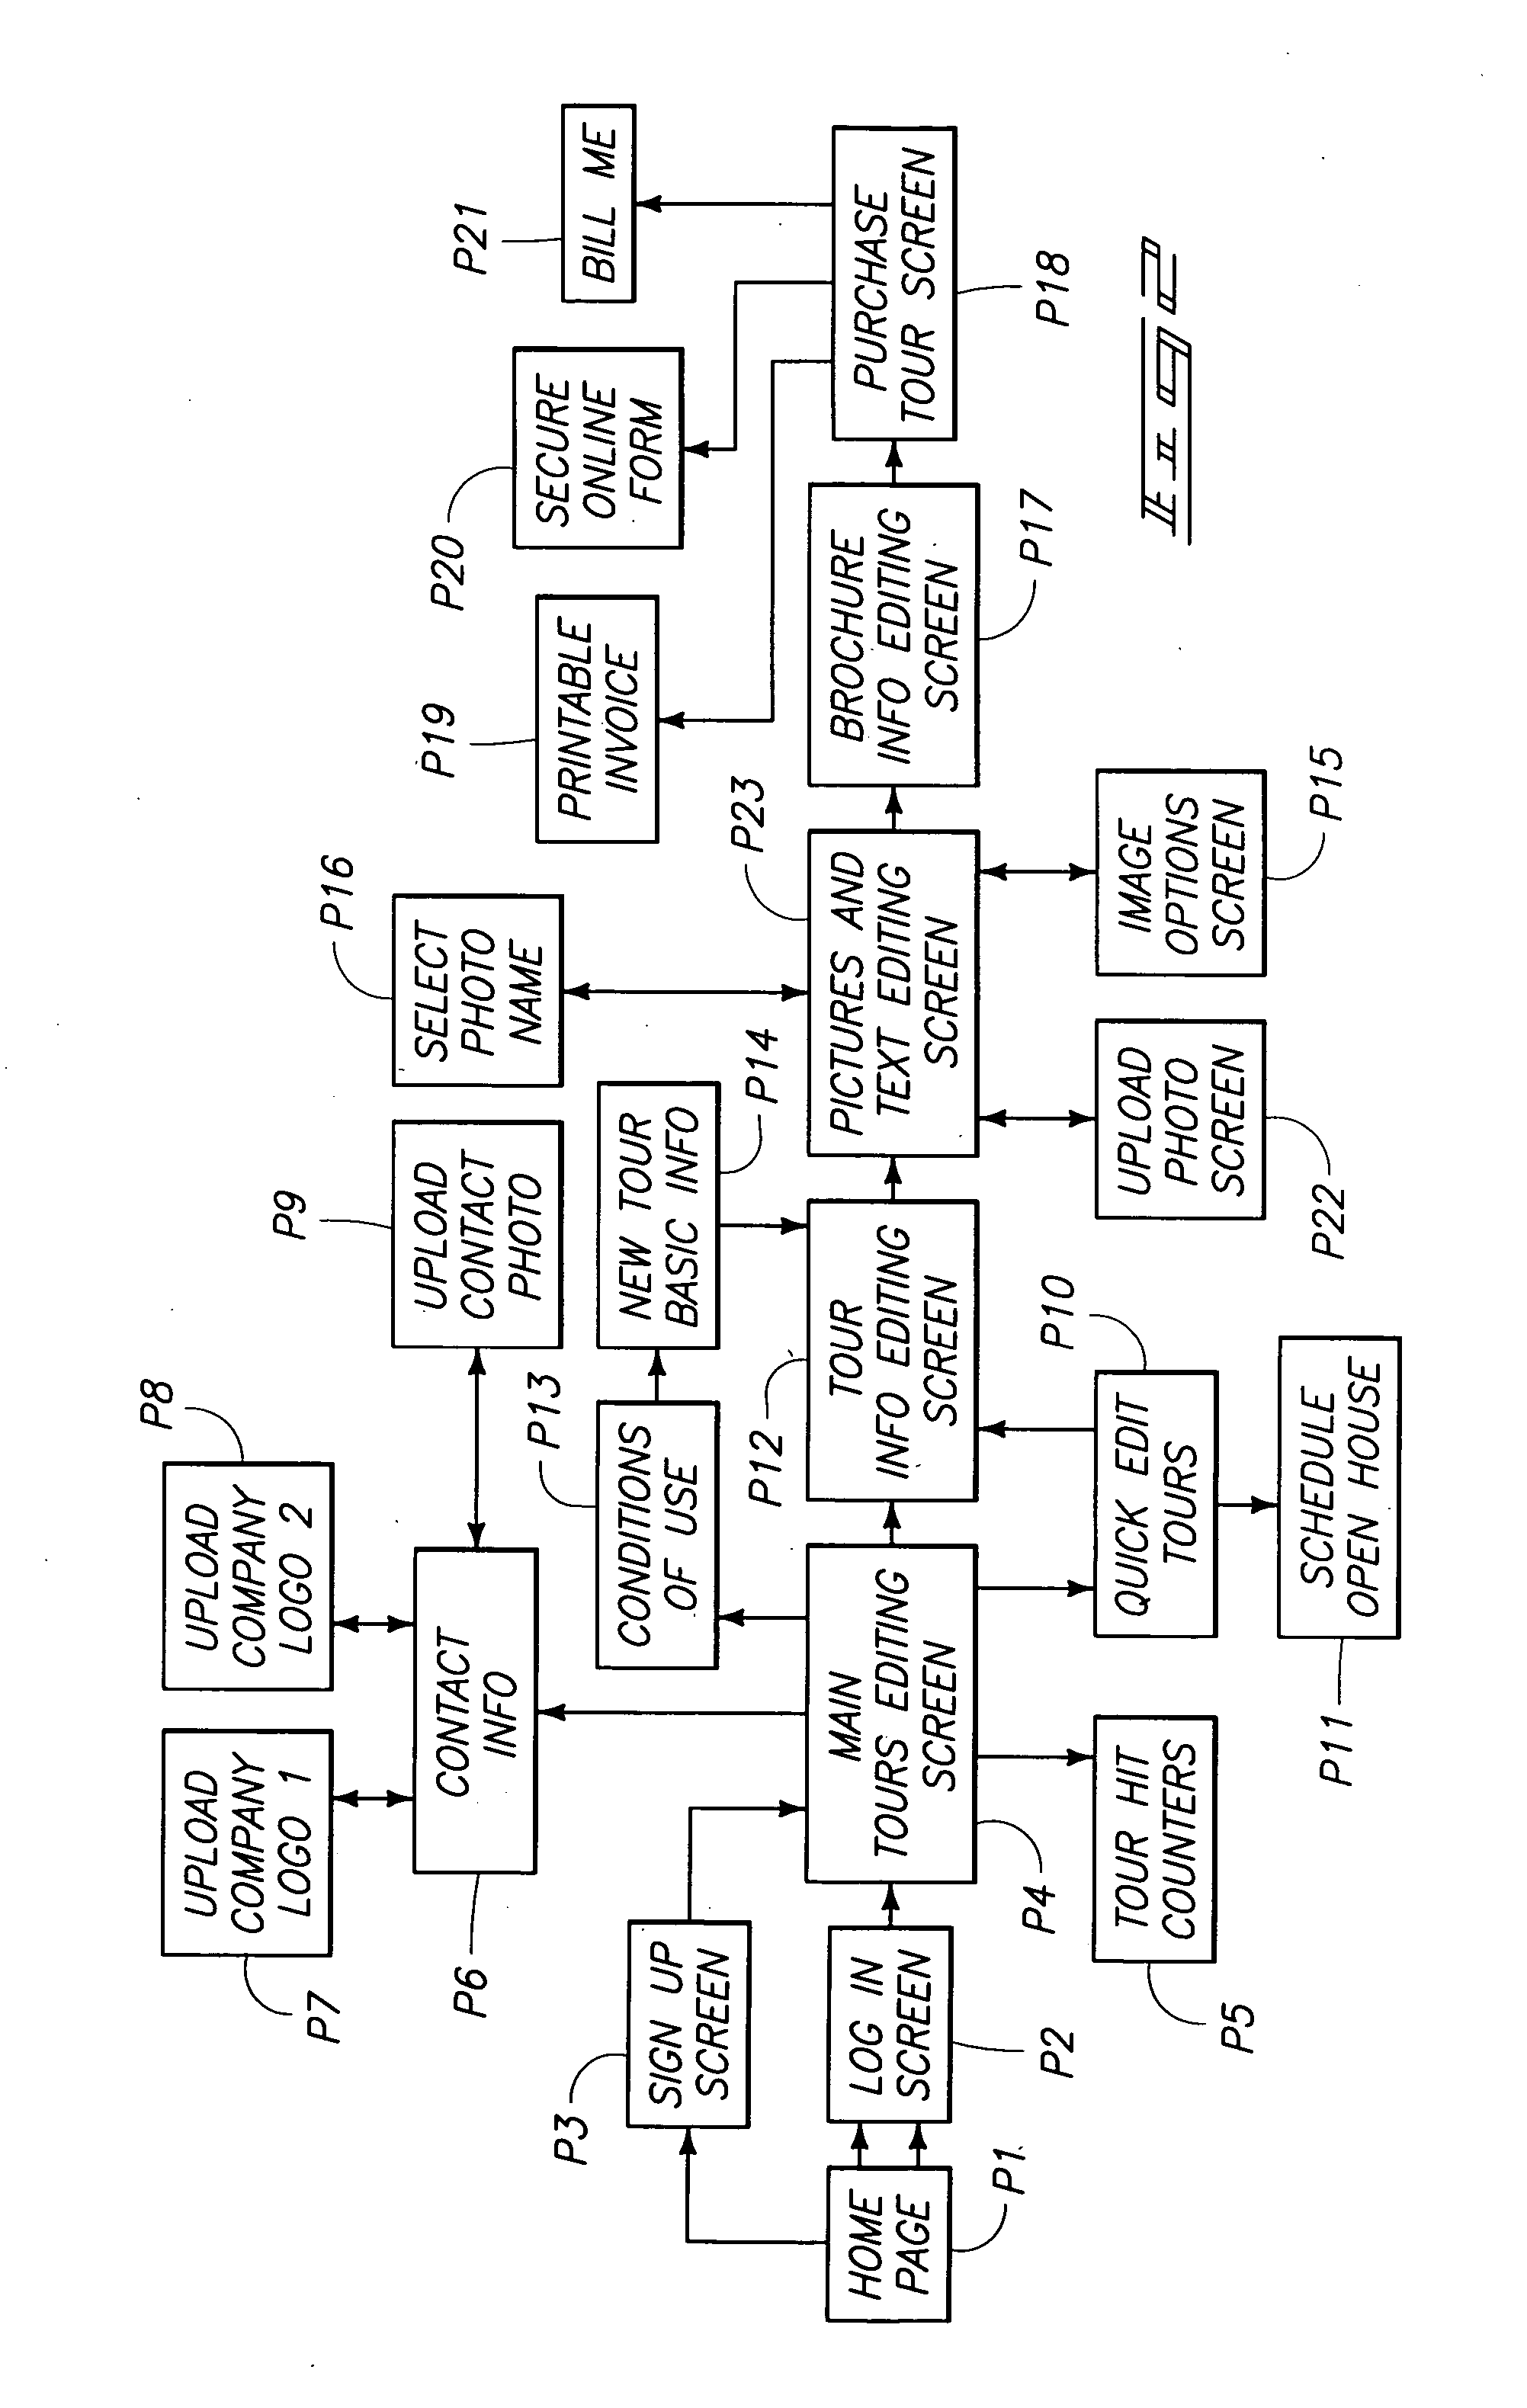 Electronic property viewing system for providing virtual tours via a public communications network, and a method of exchanging the same